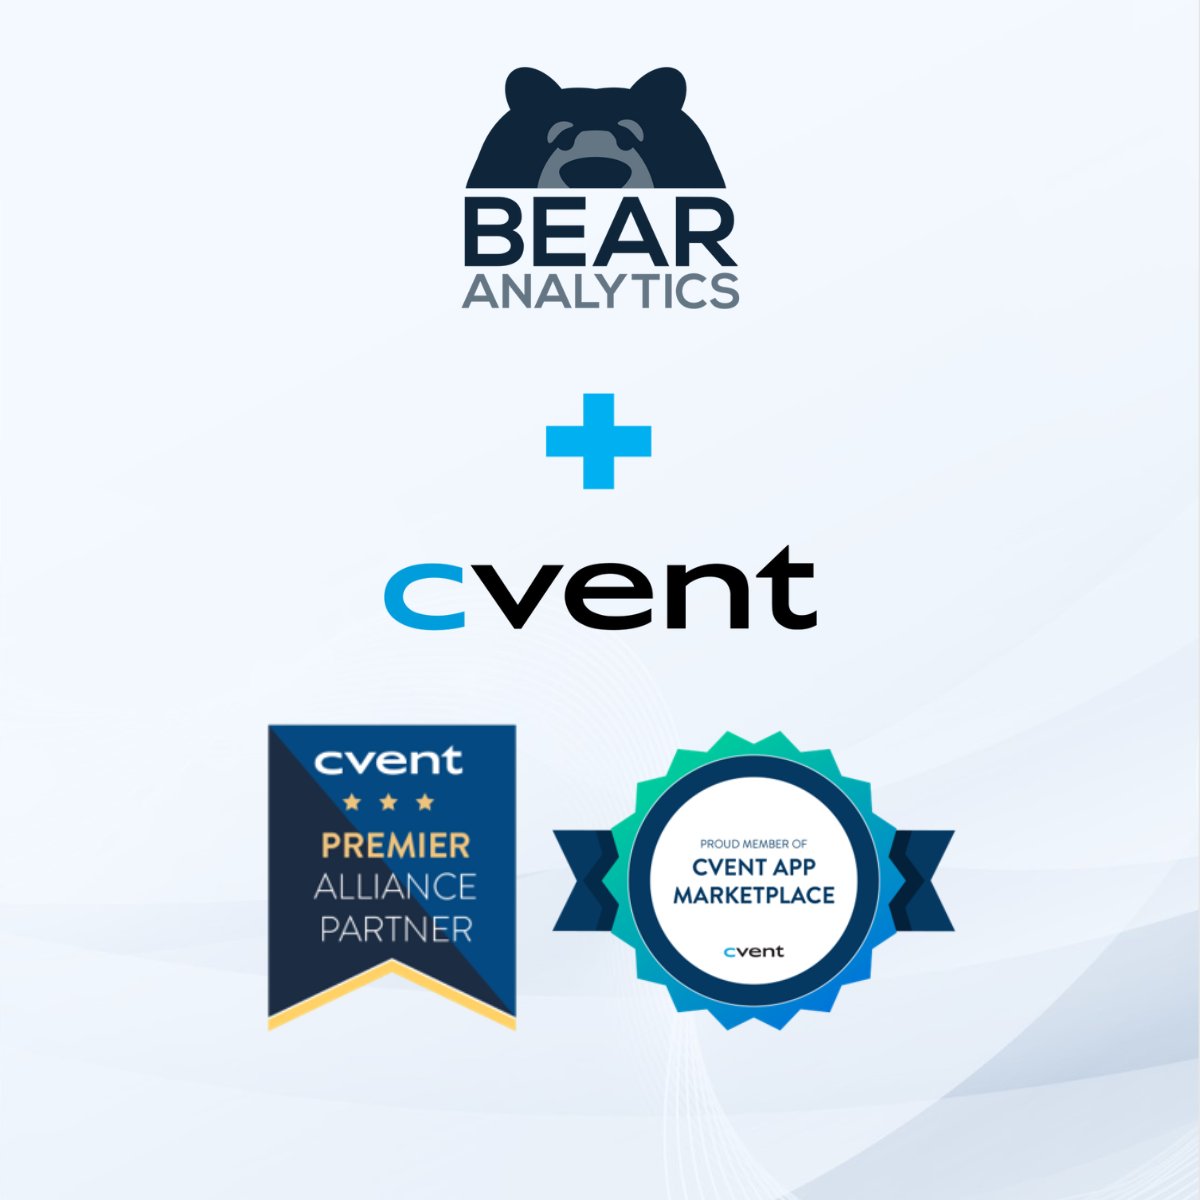 A new strategic partnership between @BearAnalytics and @cvent makes the Bear IQ data analytics platform available through the Cvent App Marketplace. Bear IQ can be used to efficiently evaluate registration, content and lead data, and more.

#BearAnalytics #Cvent #eventprofs